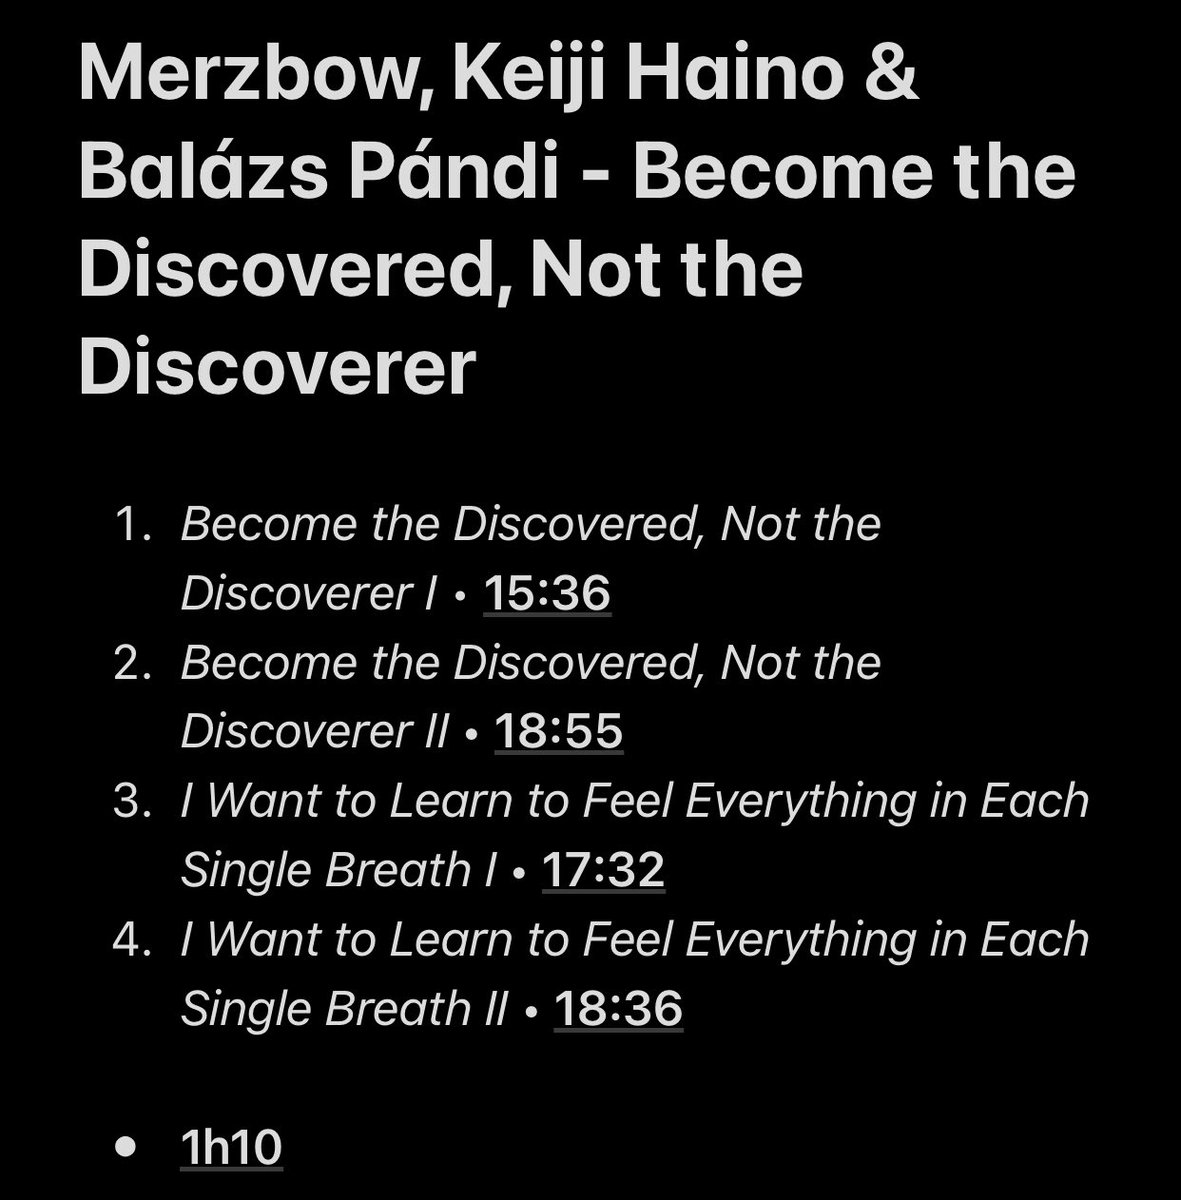 102/109: Become the Discovered, Not the Discoverer (with Keiji Haino & Balázs Pandi)Pretty good album from these three artists, chemistry between them is great. Not an outstanding project but still decent in Merzbow discography.